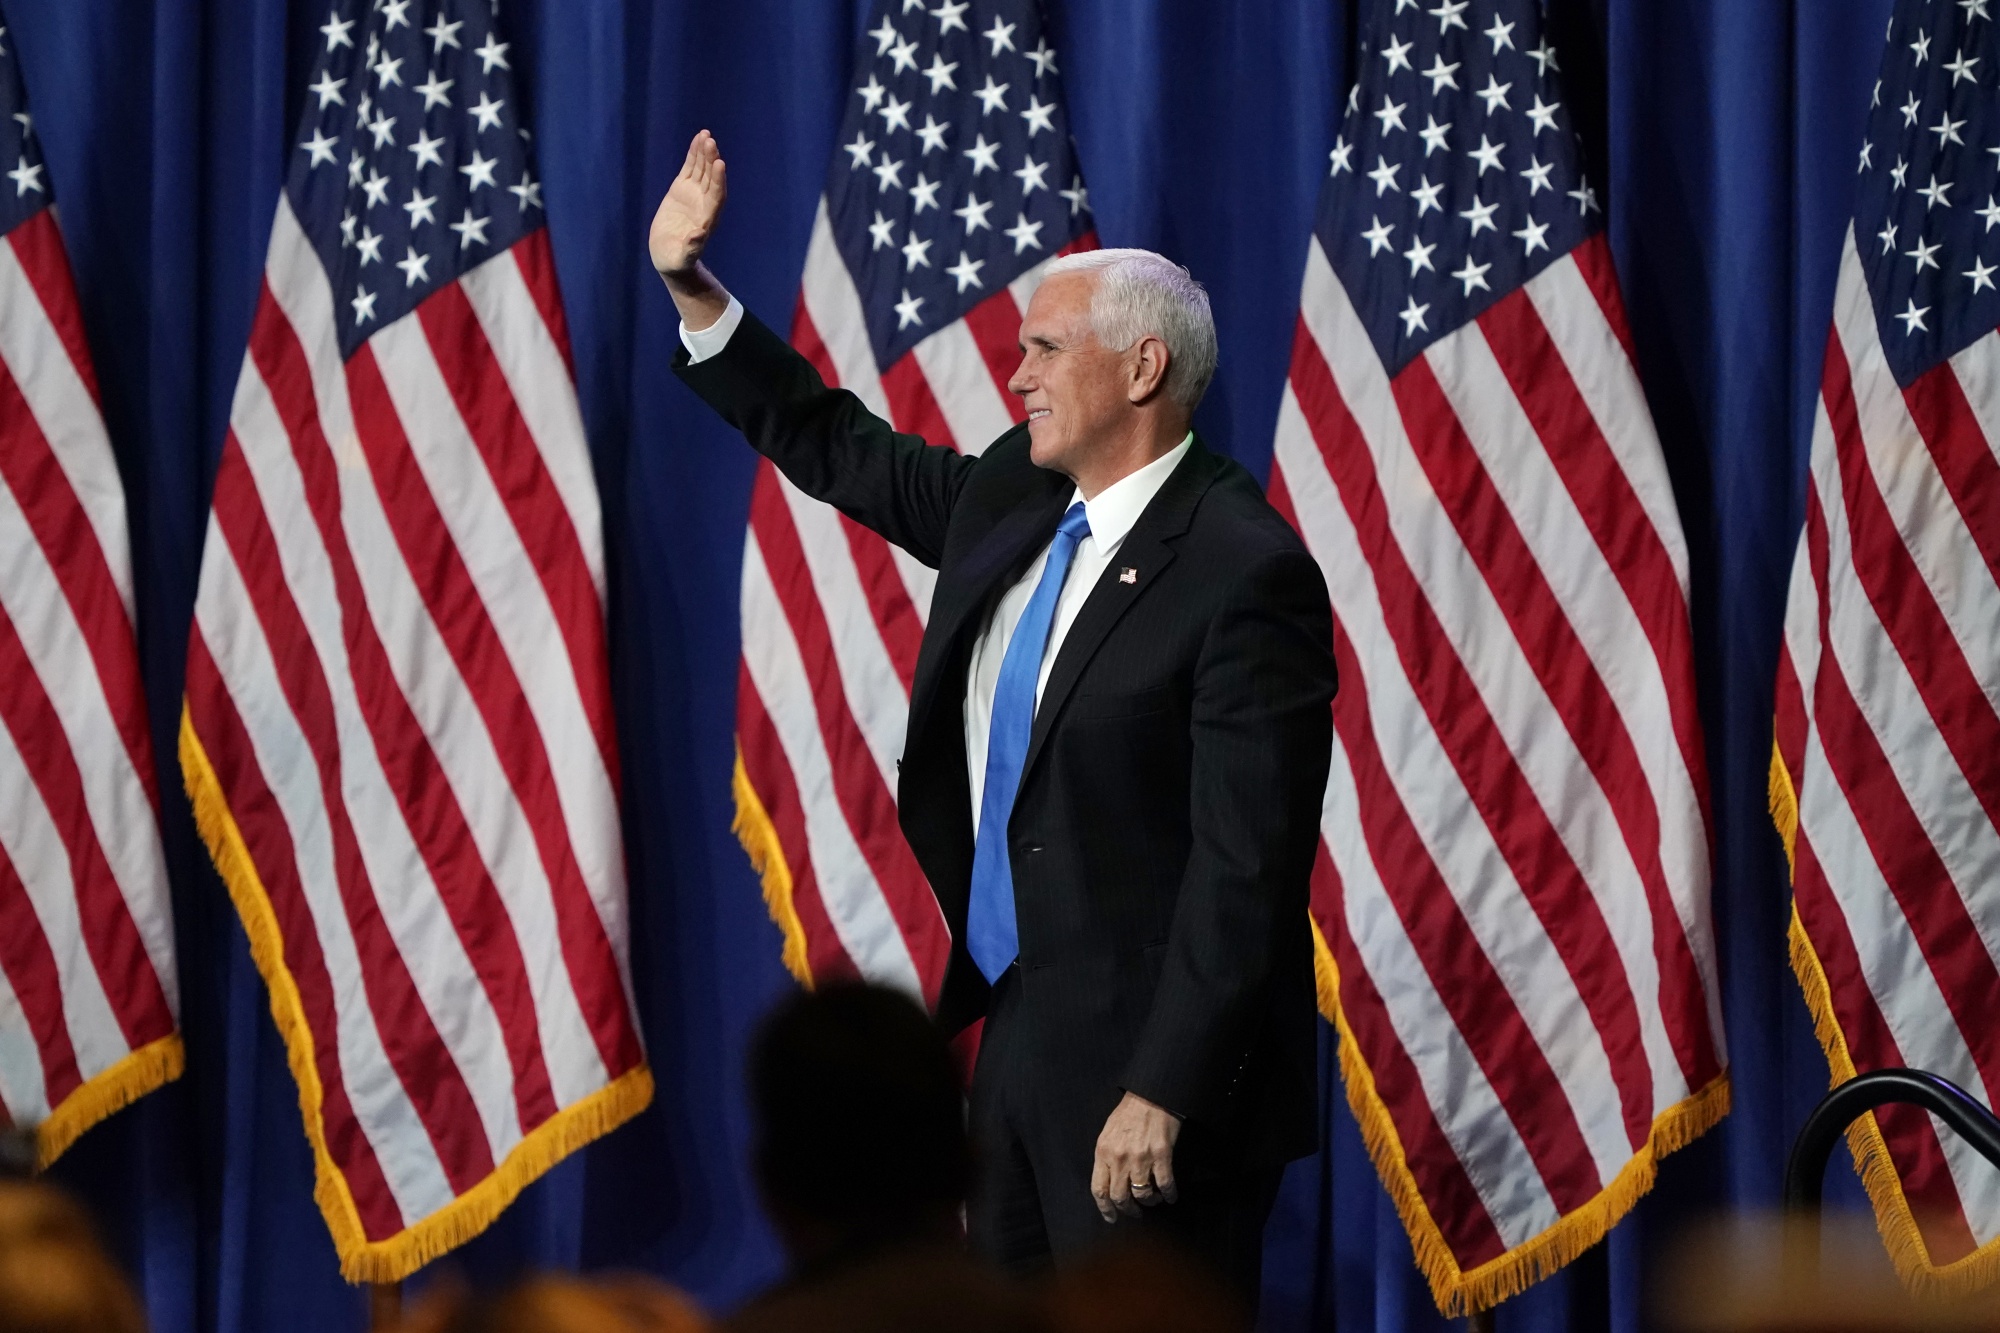 Mike Pence waves attends the Republican National Convention in Charlotte, North Carolina, on Aug. 24.